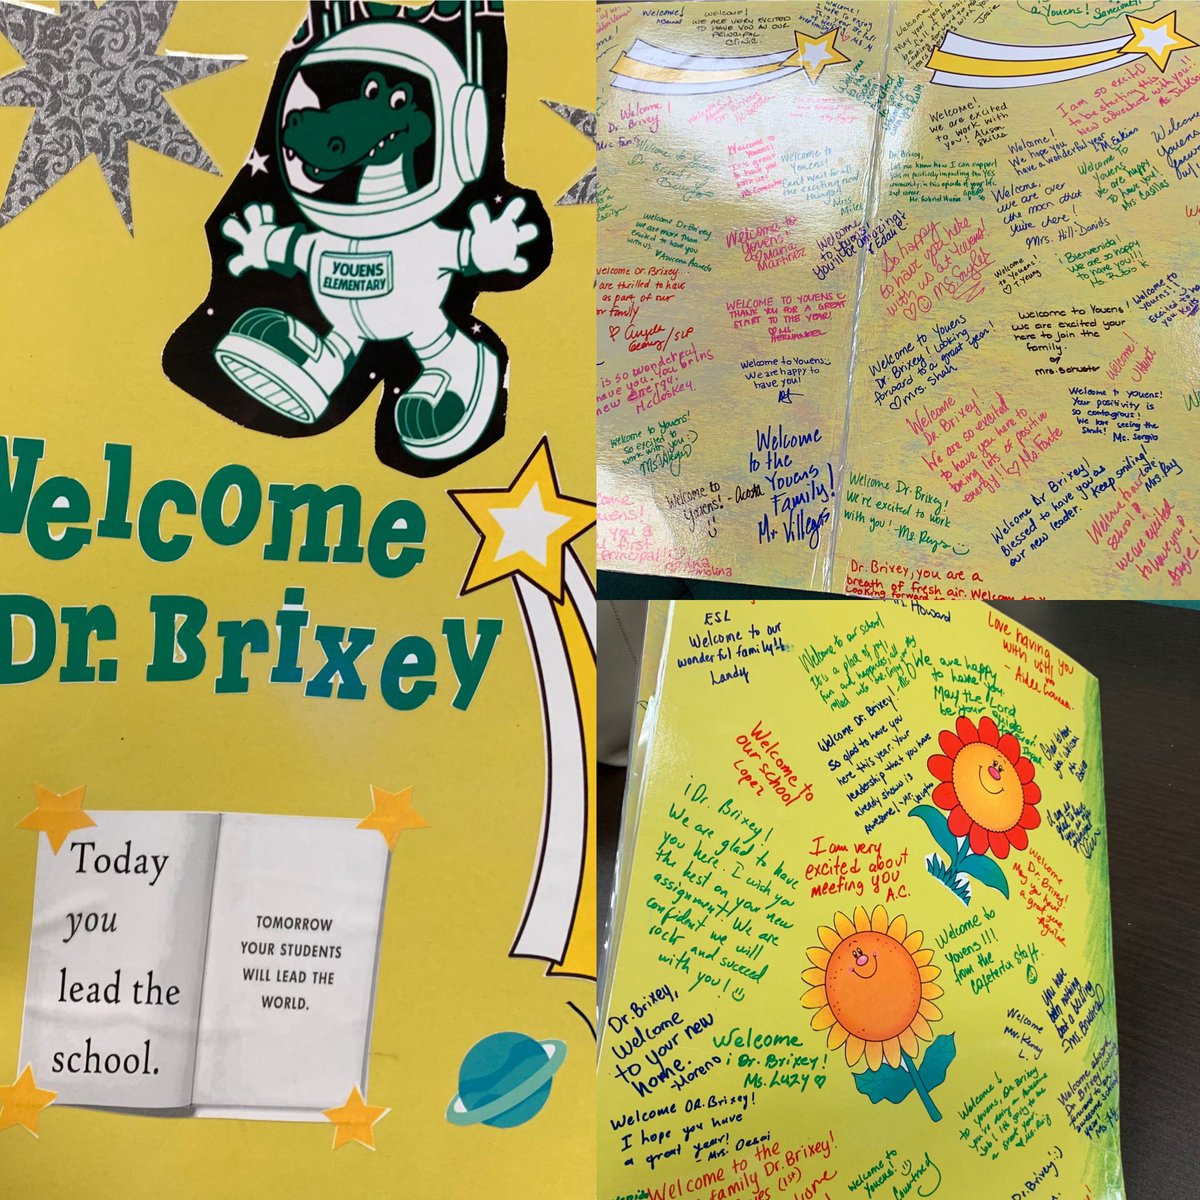 Thank you to my Gator team, helping spread sunshine to me- you are the kindest educators and teammates I could ask for! I’m blessed to be a Gator! @Youens_Gators #AliefLeads #createjoy #sharethesunshine #KindnessMatters #smile #MondayMotivation #MissionPossible #growtogether